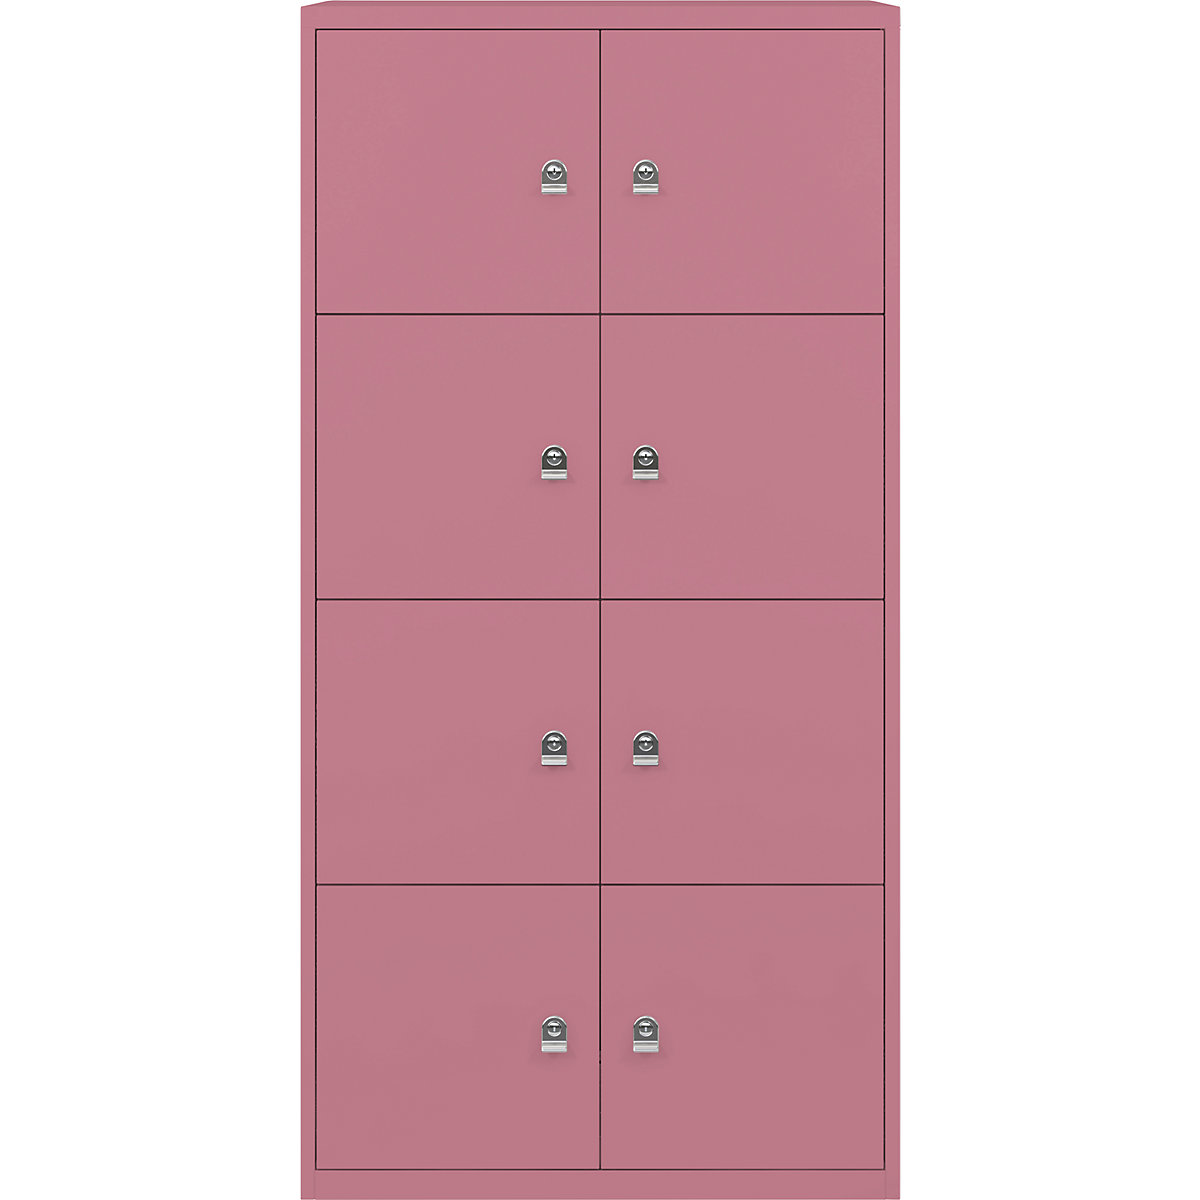 BISLEY – LateralFile™ lodge, with 8 lockable compartments, height 375 mm each, pink